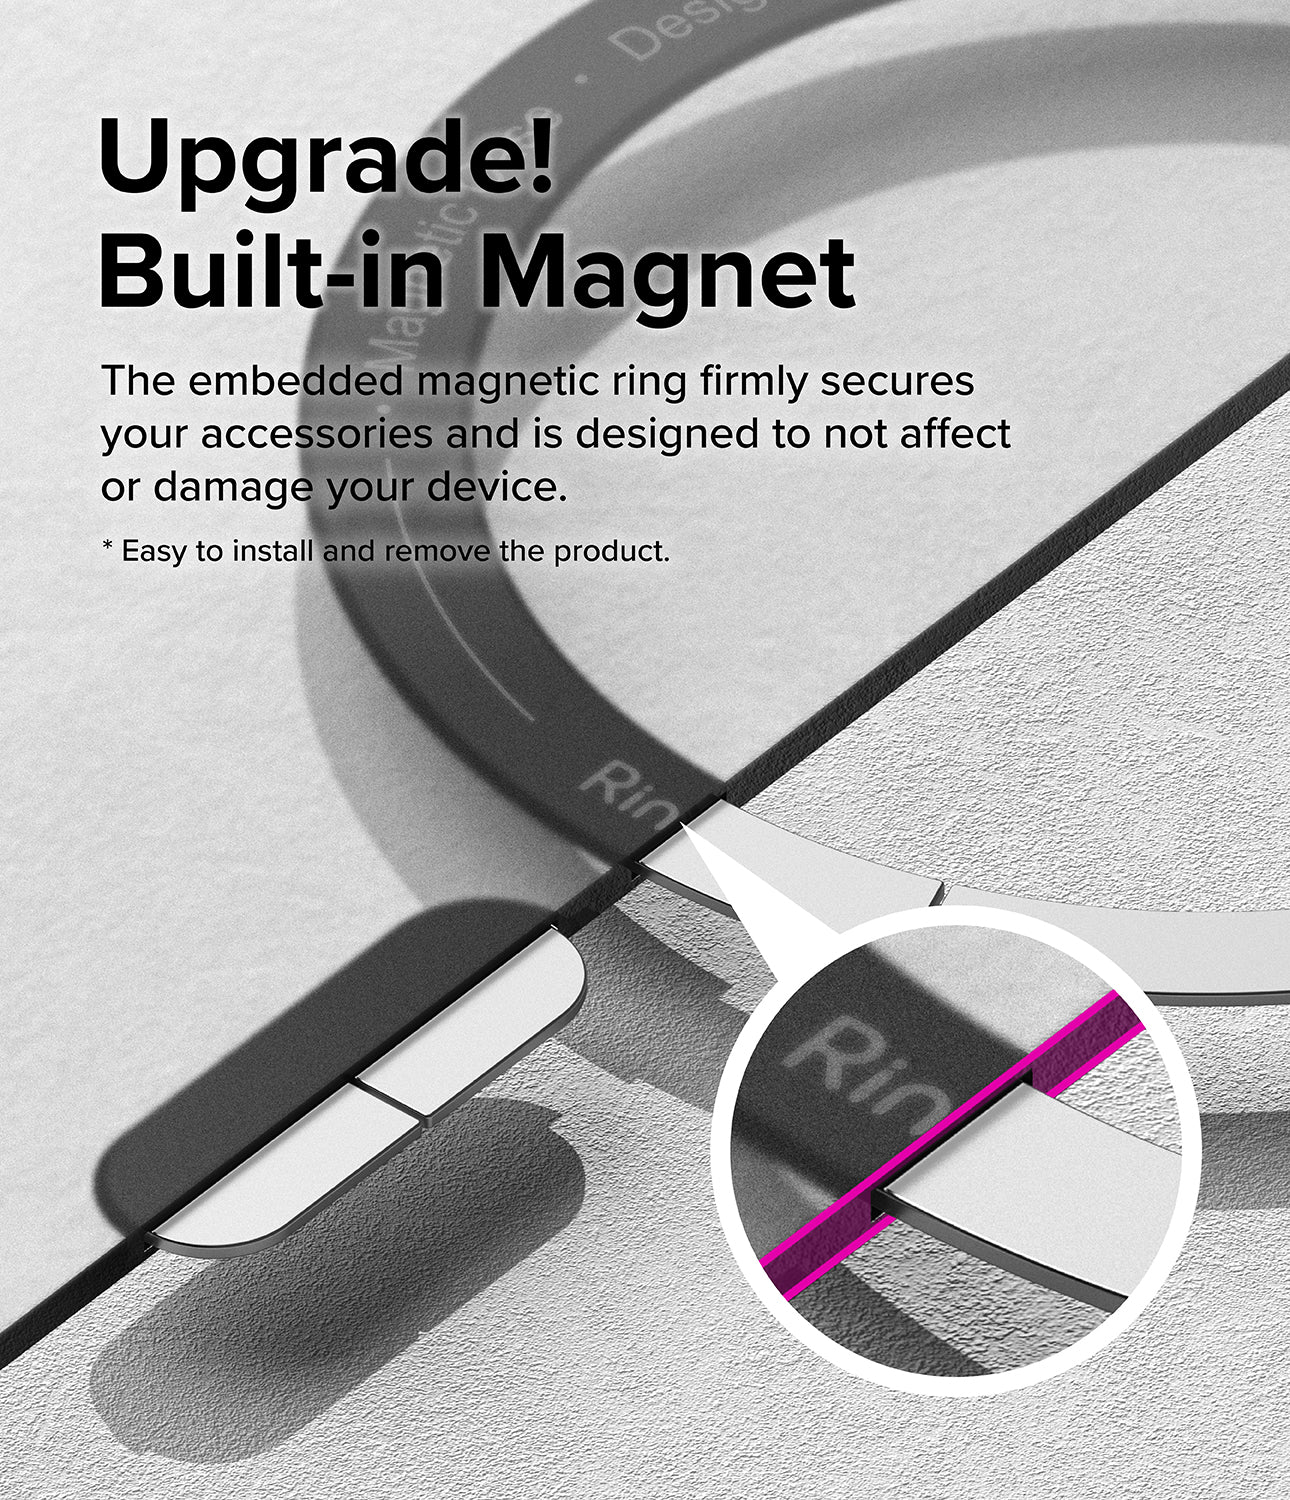 iPhone 15 Plus Case | Fusion Bold Magnetic - Upgrade! Built-in Magnet. The embedded magnetic ring firmly secures your accessories and is designed to not affect or damage your device.